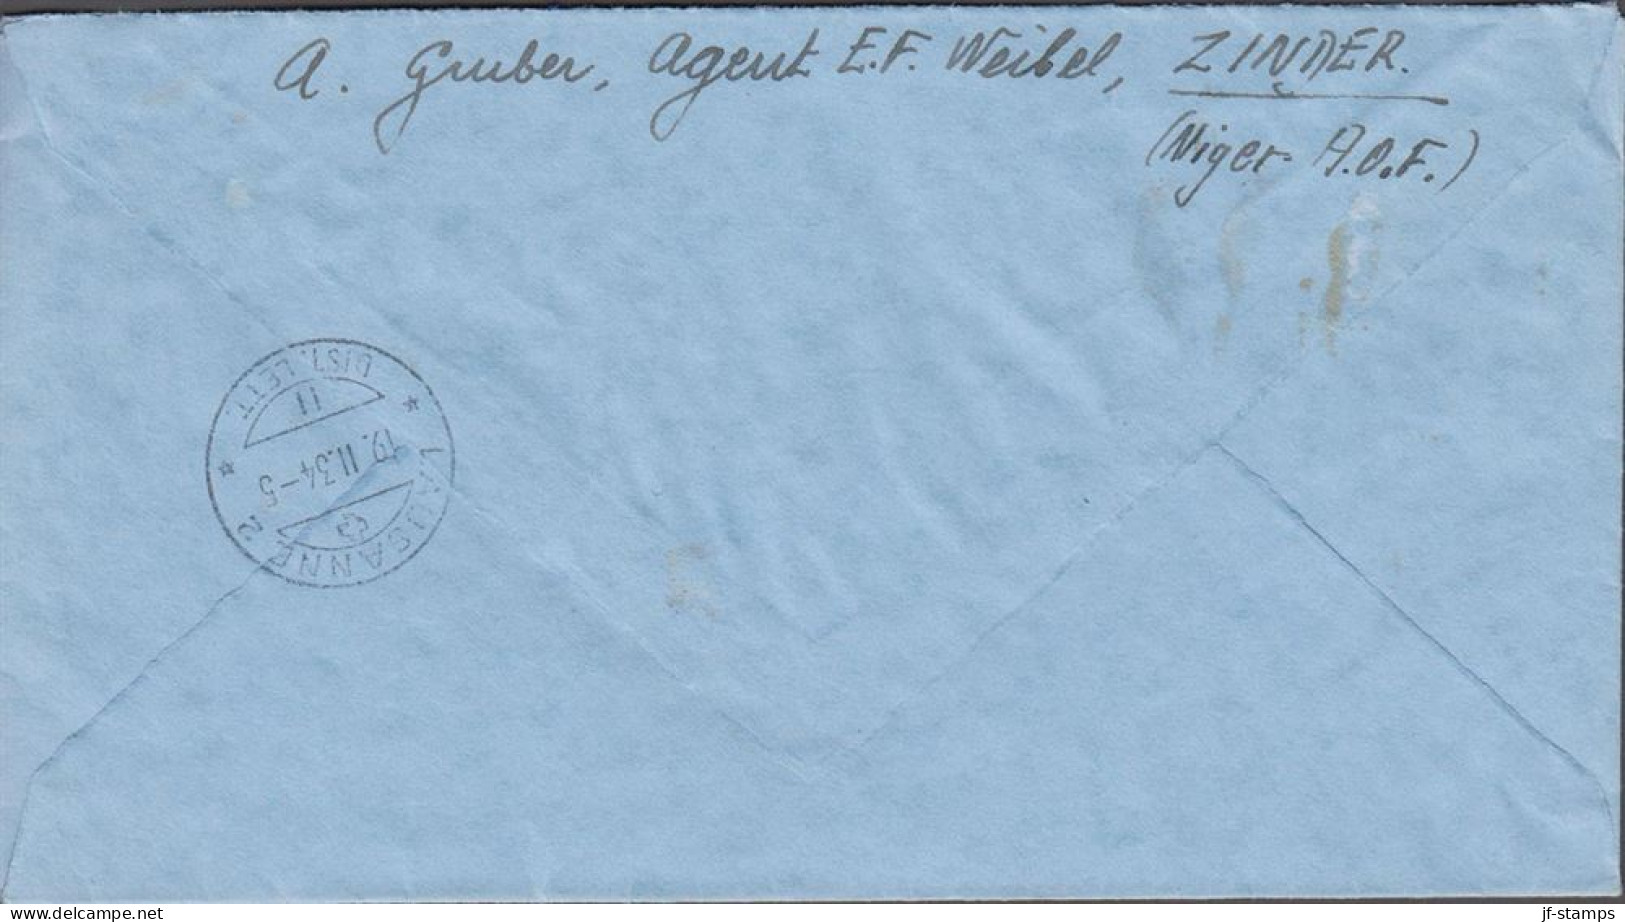 1934. NIGER. Rare Registered Cover To Lausanne, Suisse With Margin 4block (number B 23012 15)... (MICHEL 17+) - JF545402 - Used Stamps